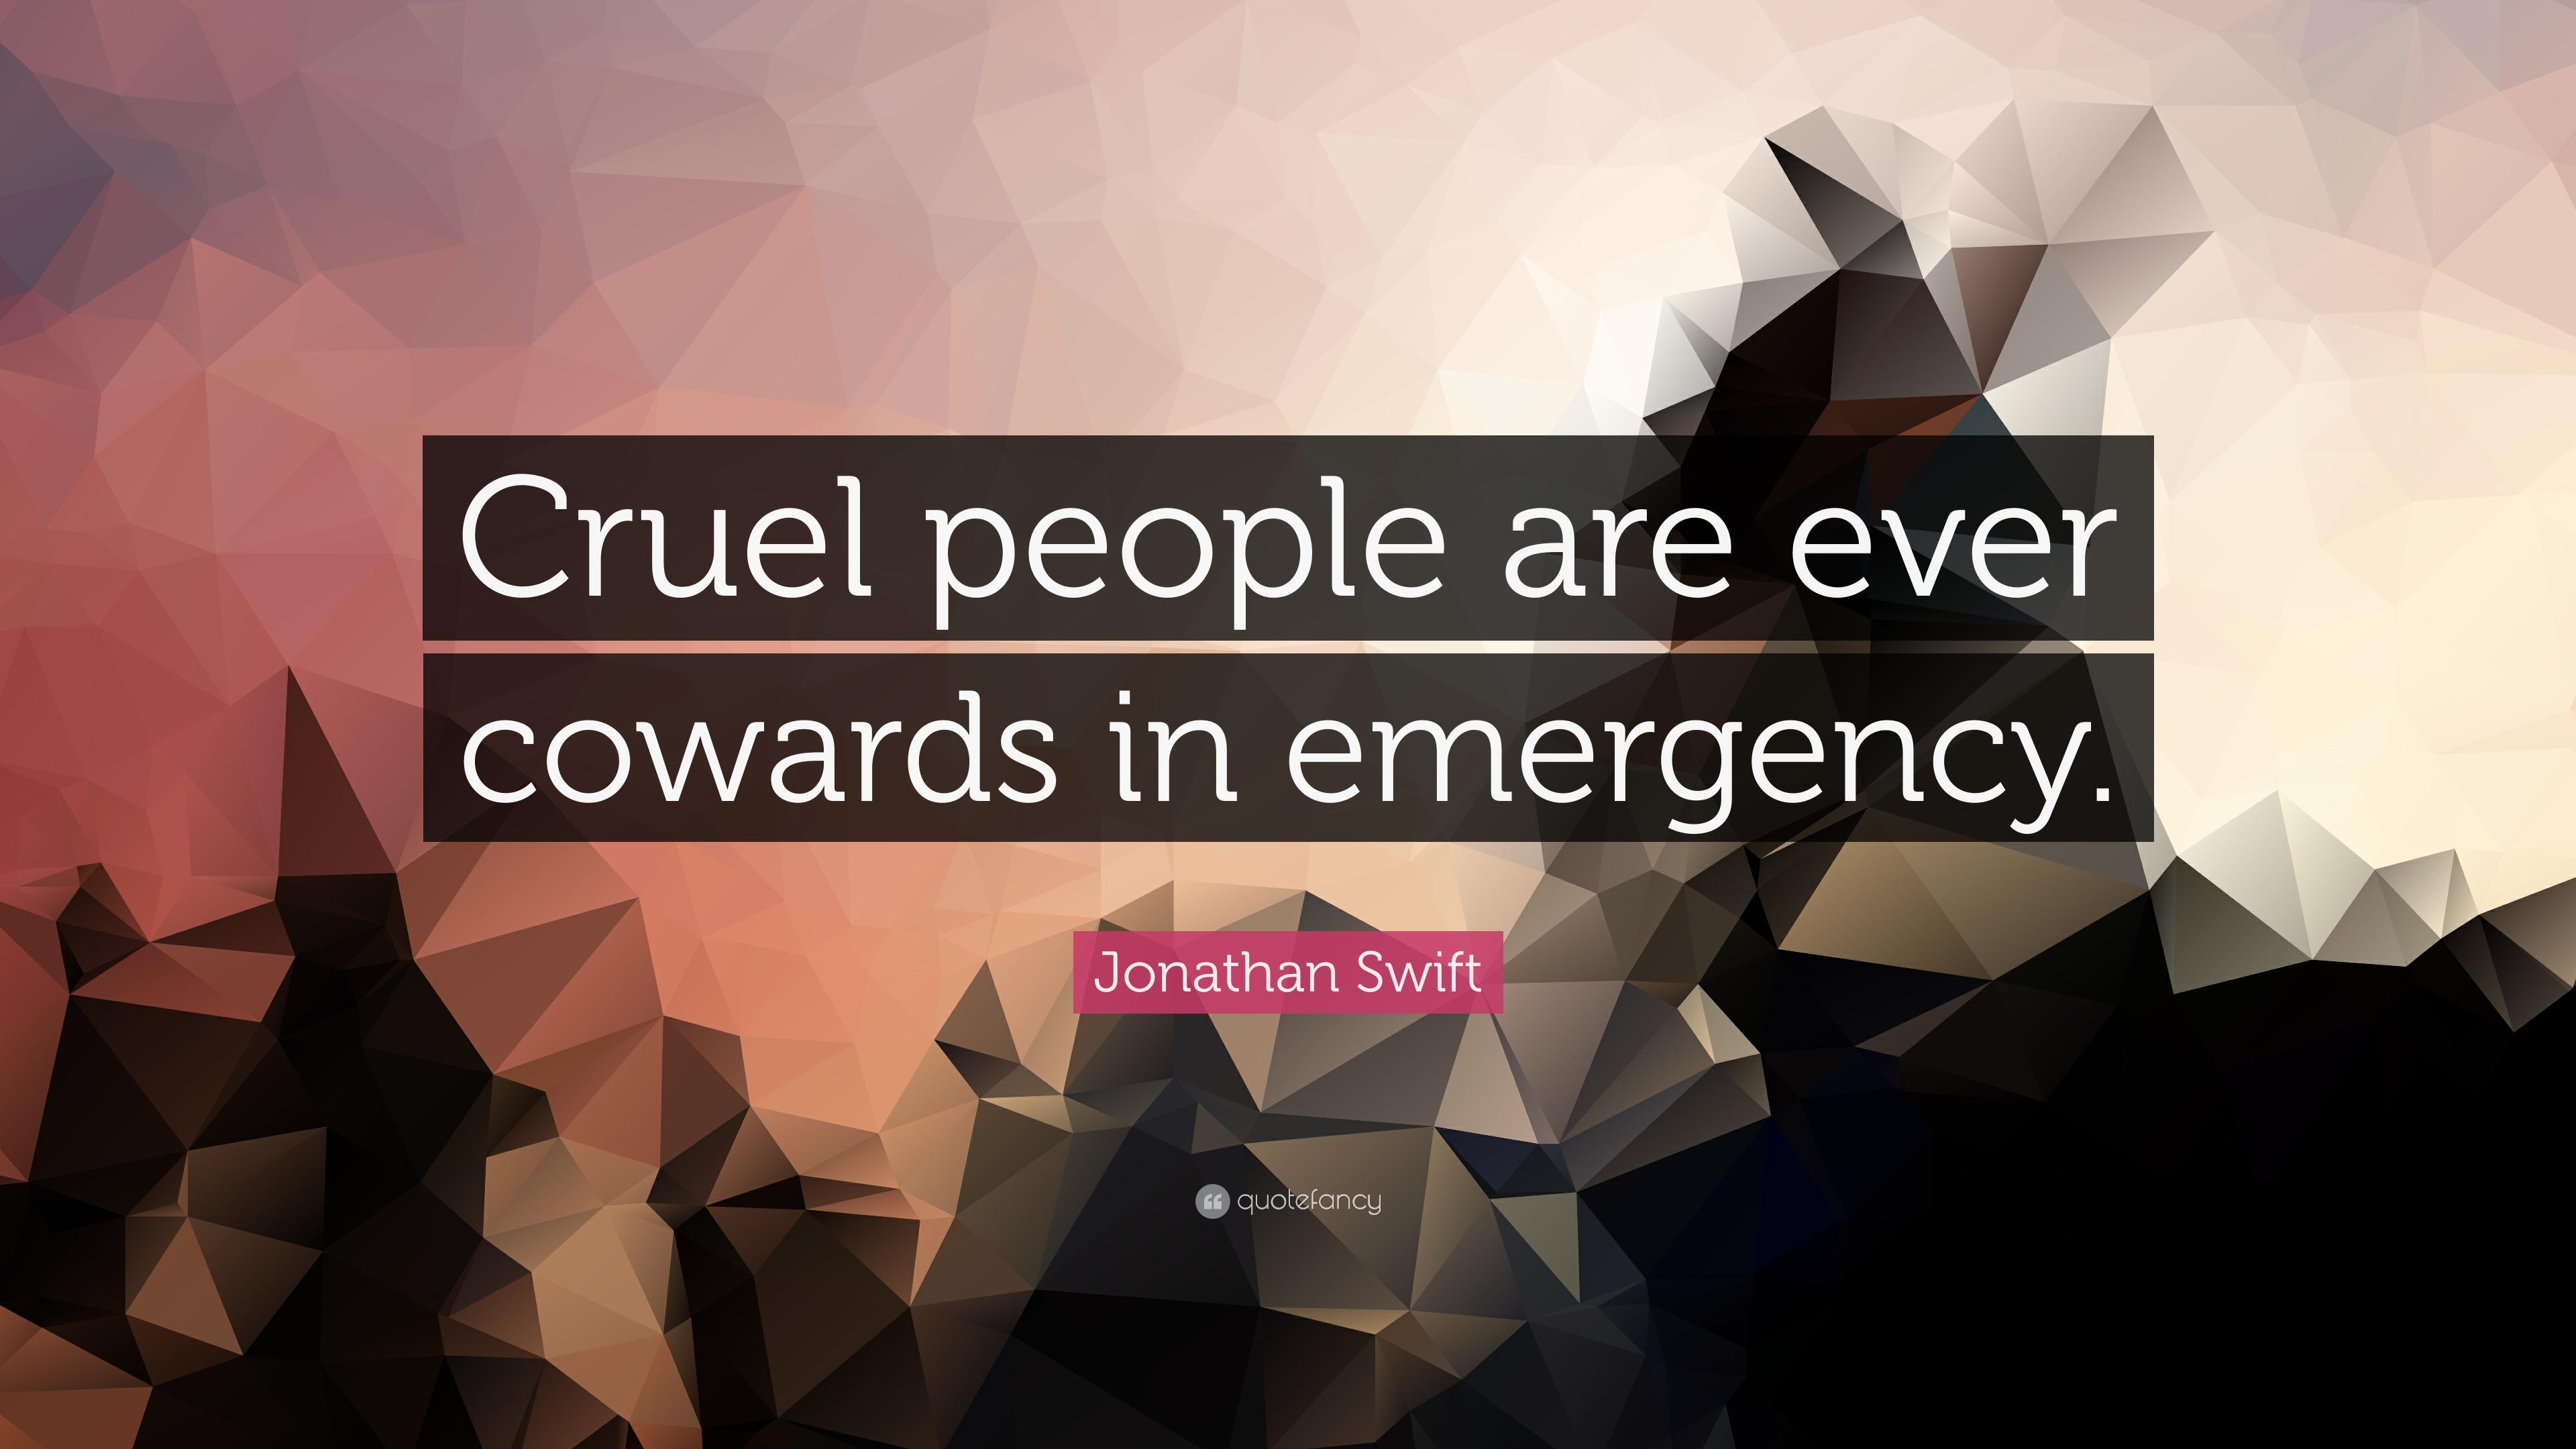 Jonathan Swift Quote: “Cruel people are ever cowards in emergency